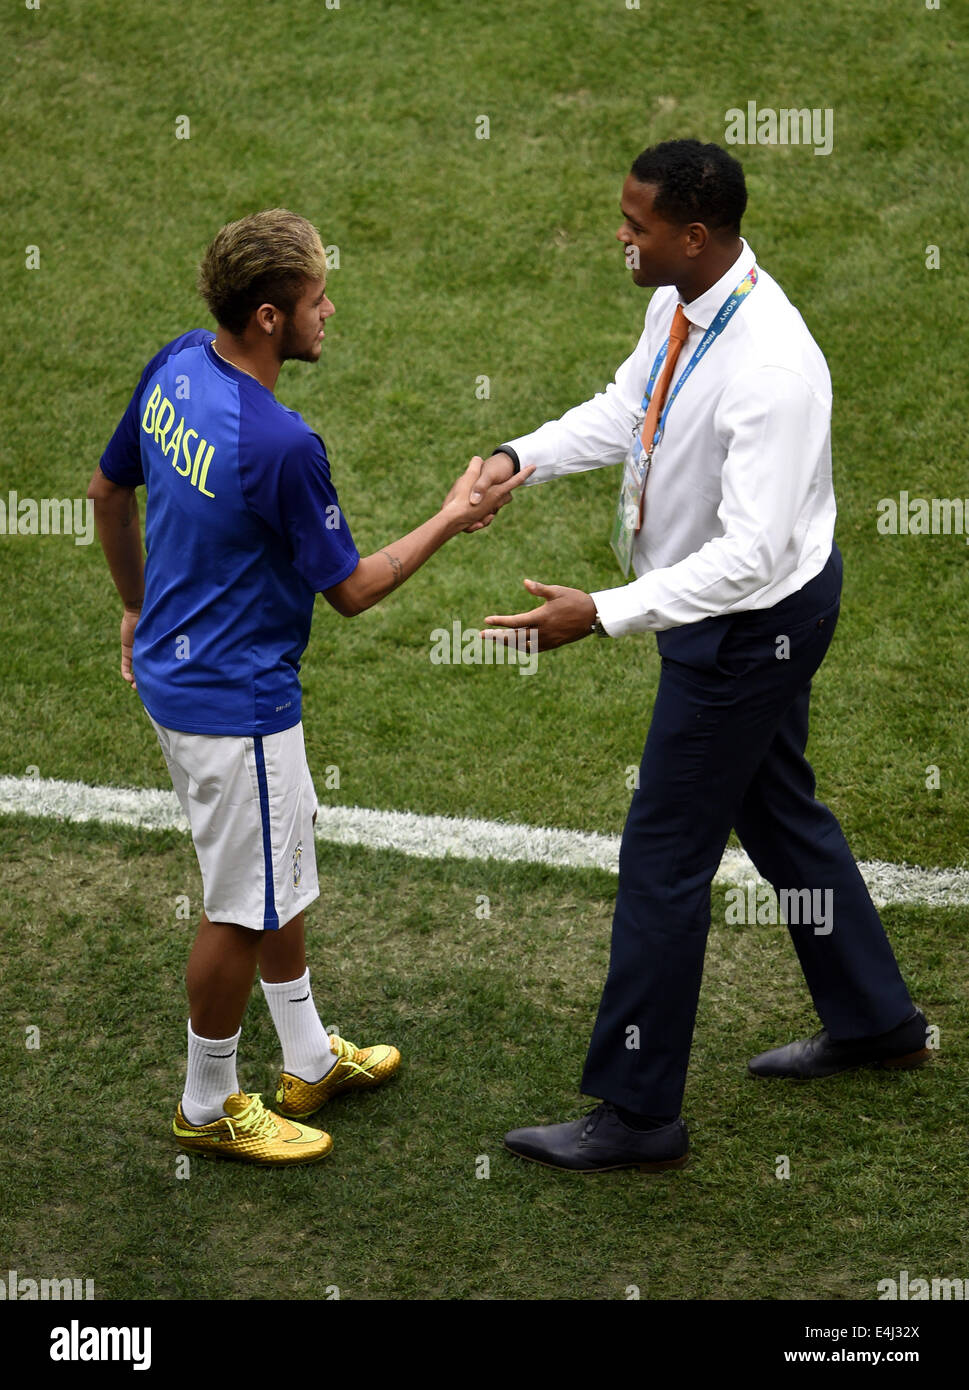 Brasilia, Brazil. 12th July, 2014. Brazil's Neymar (L) shakes hands with Netherlands' assistant coach Patrick Kluivert before the third place play-off match between Brazil and Netherlands of 2014 FIFA World Cup at the Estadio Nacional Stadium in Brasilia, Brazil, on July 12, 2014. Credit:  Lui Siu Wai/Xinhua/Alamy Live News Stock Photo